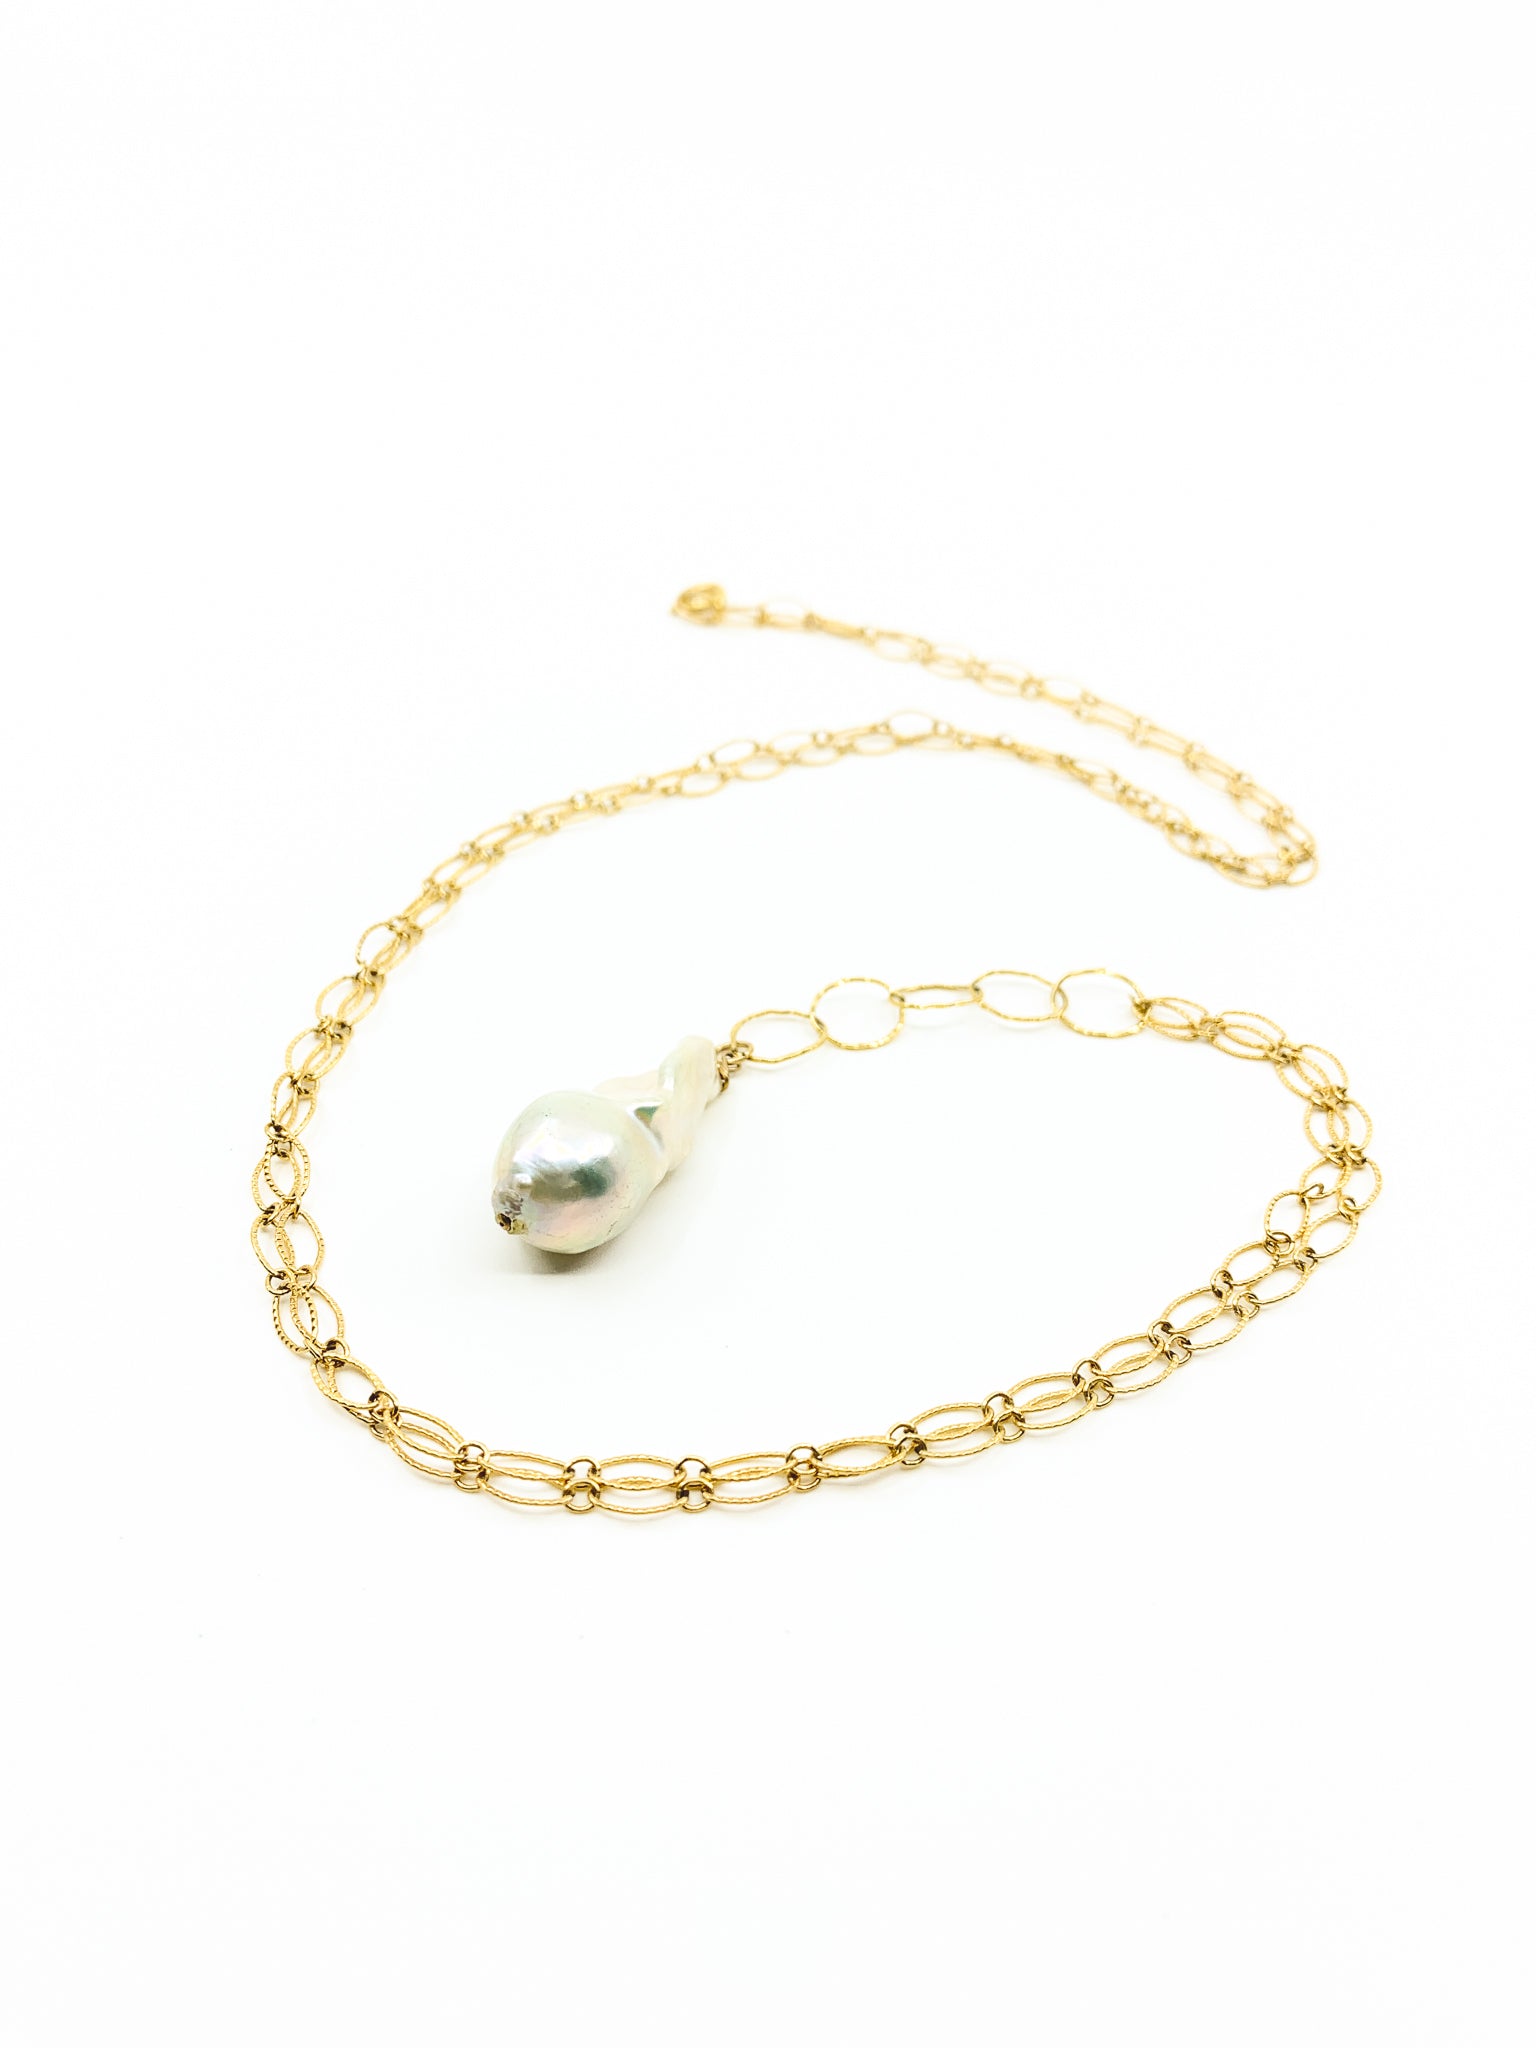 white flameball pearl long necklace by eve black jewelry made in Hawaii